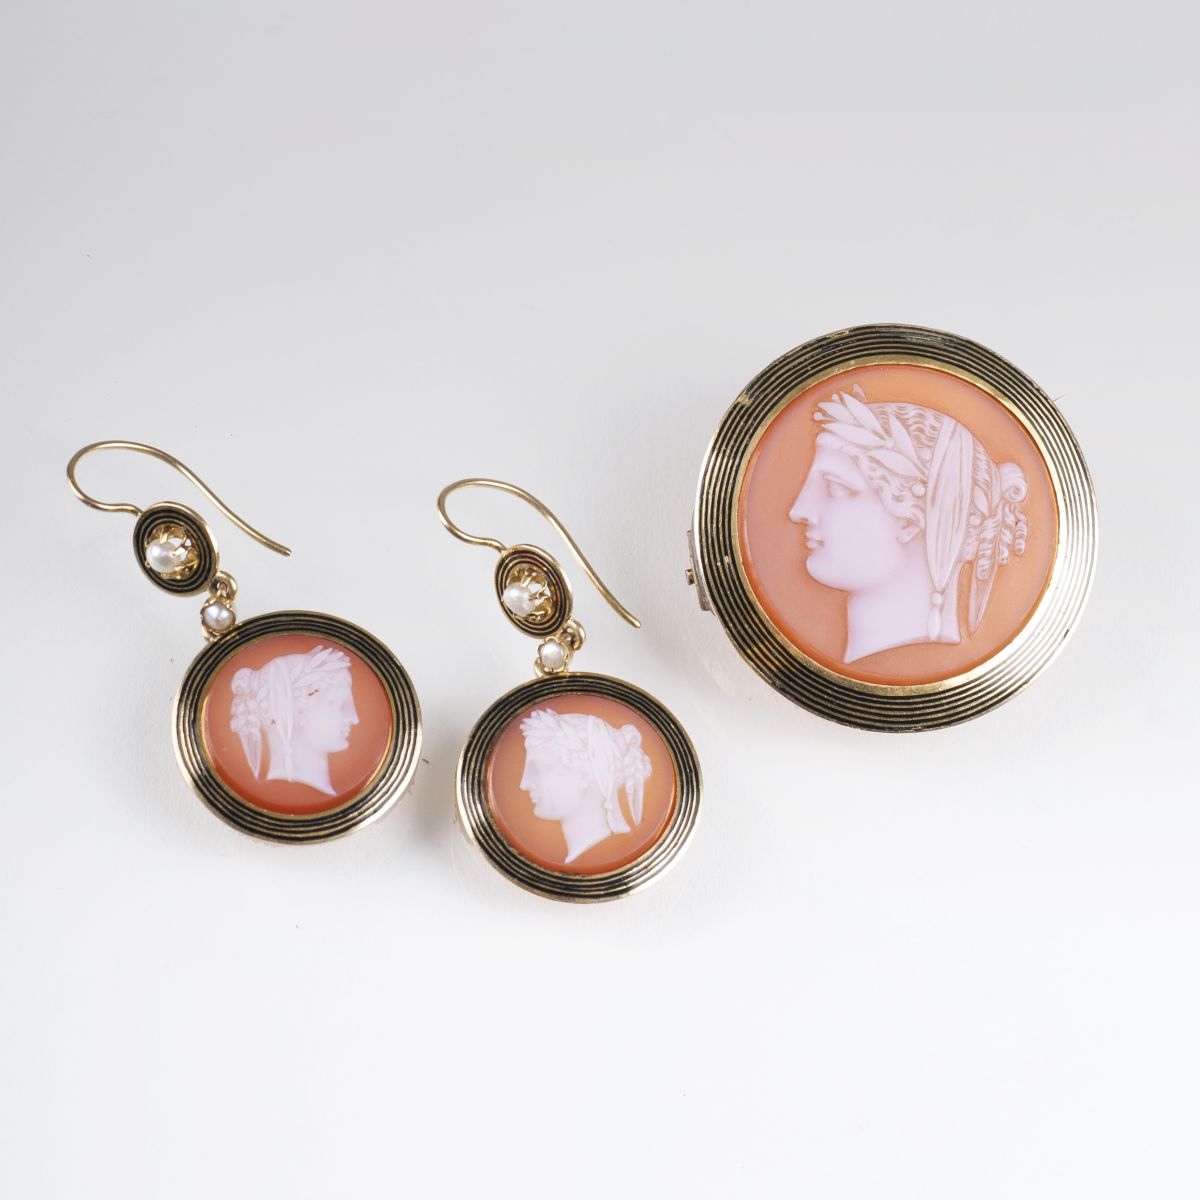 An agate jewelry set with cameos 'Flora'